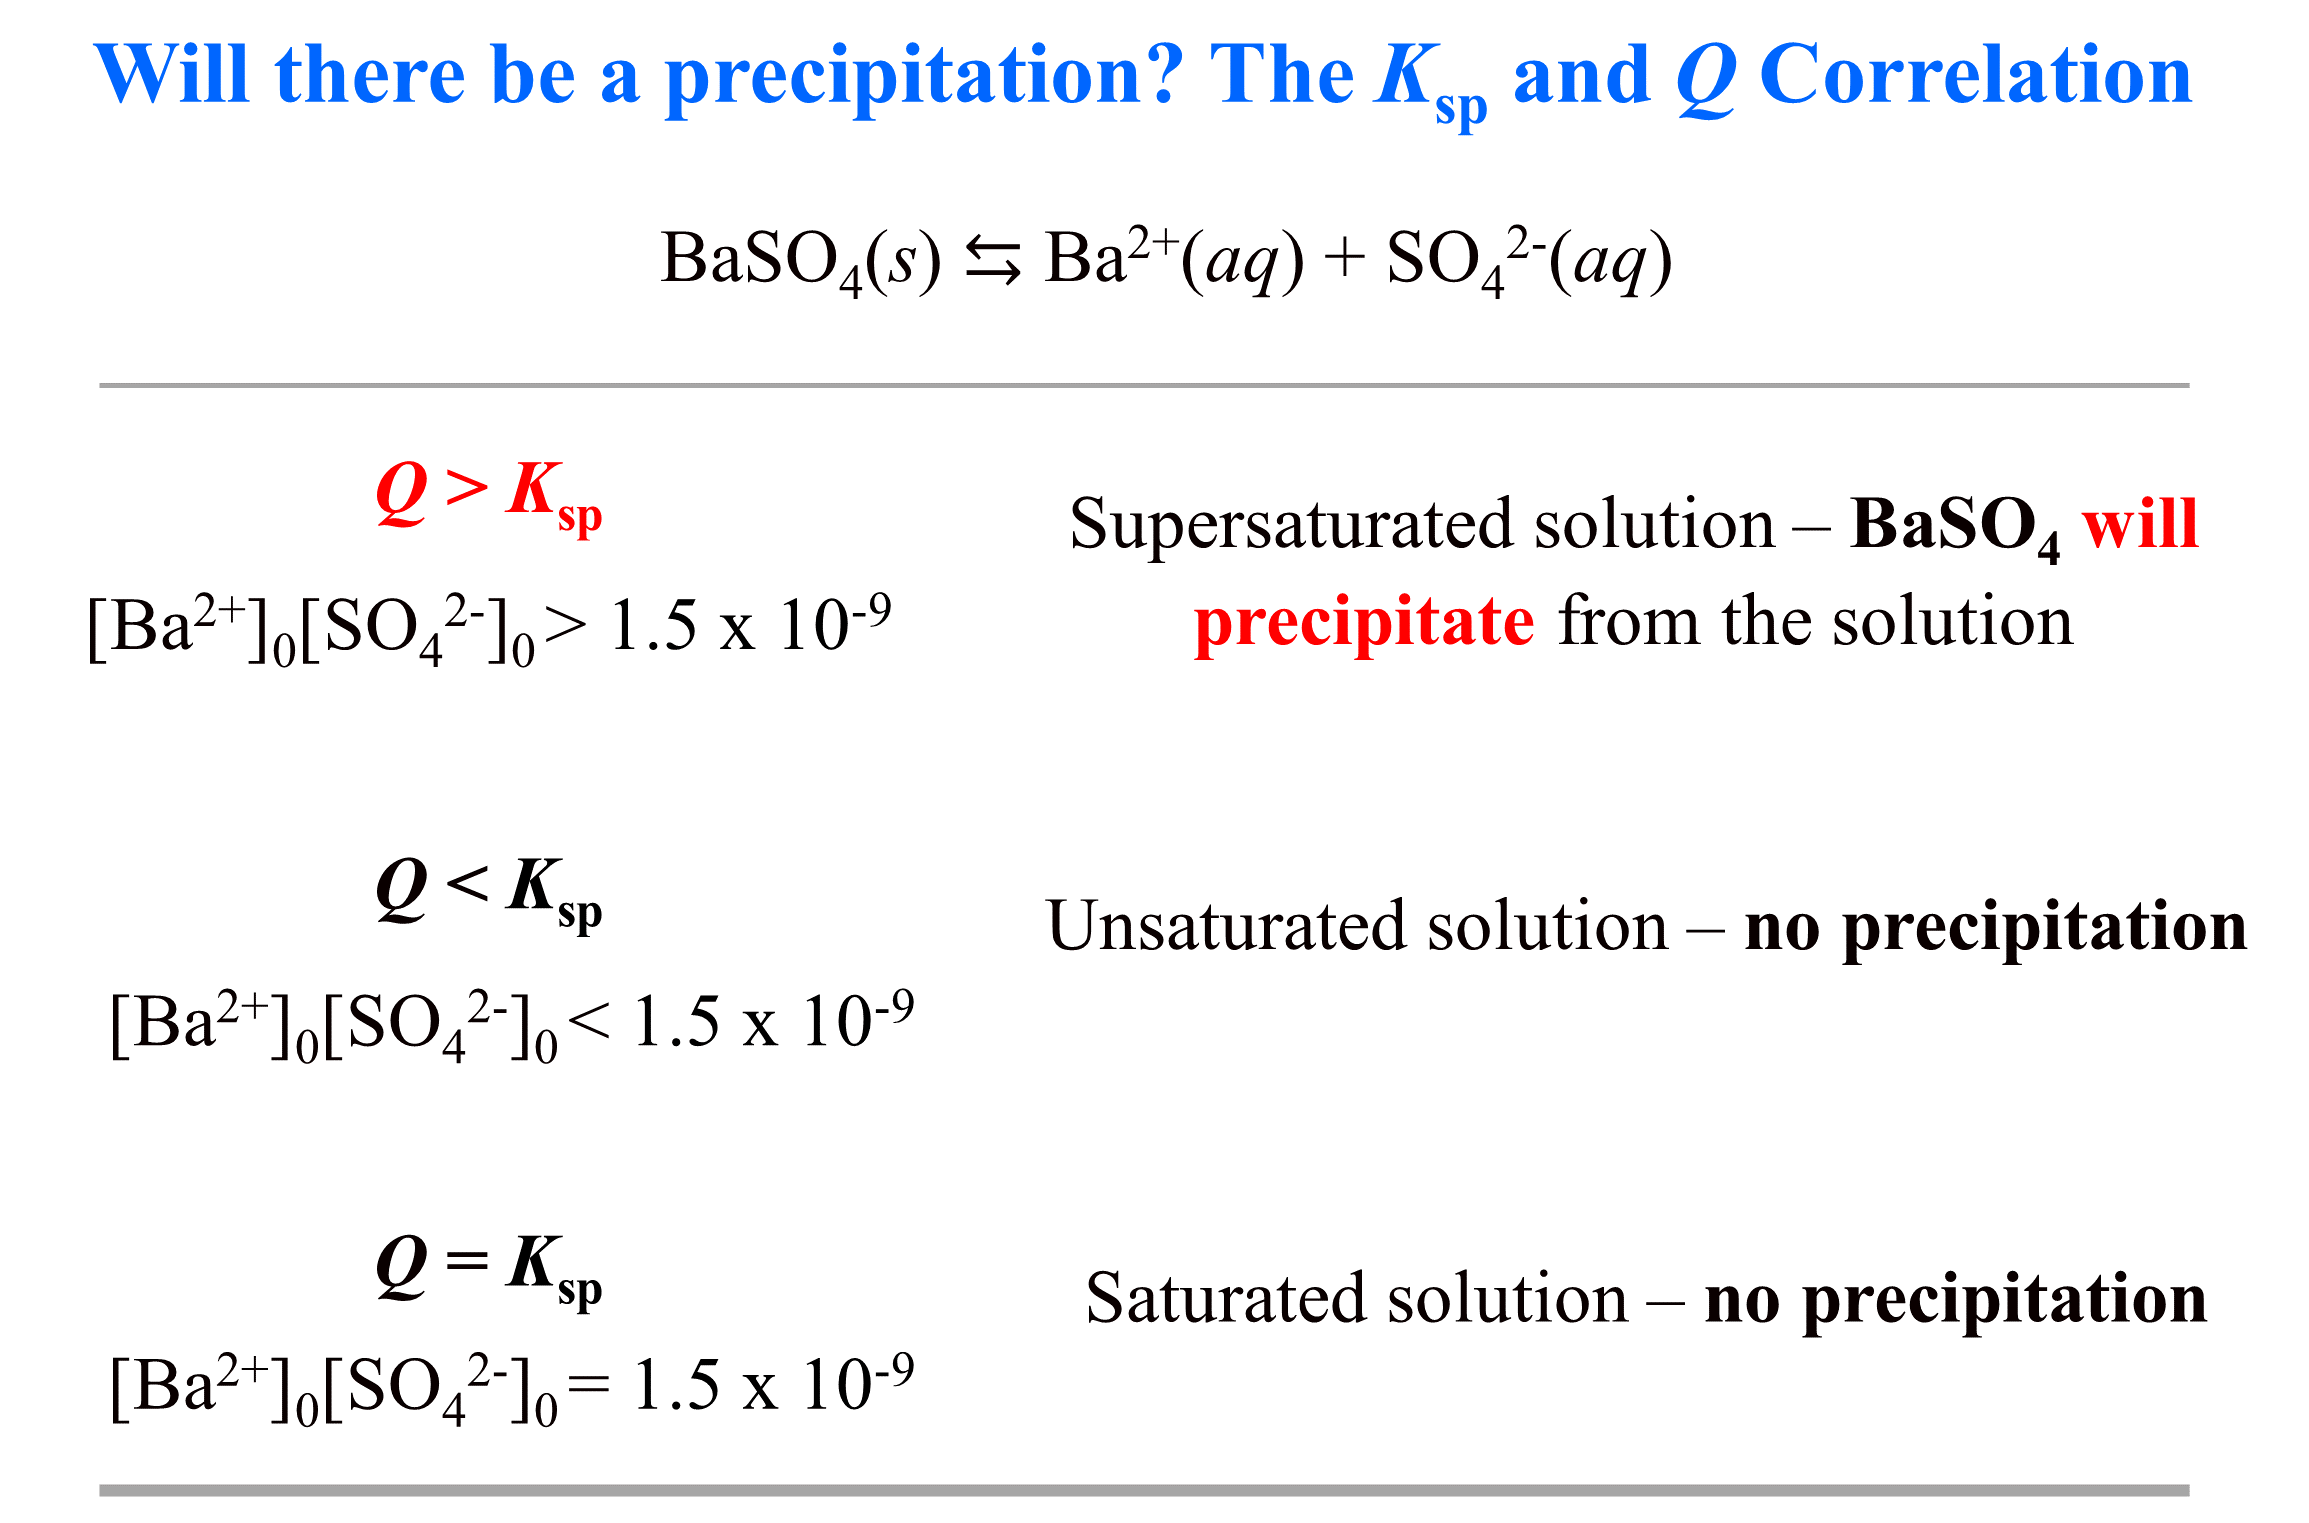 Will there be a precipitation at a given concentration Ksp and Q